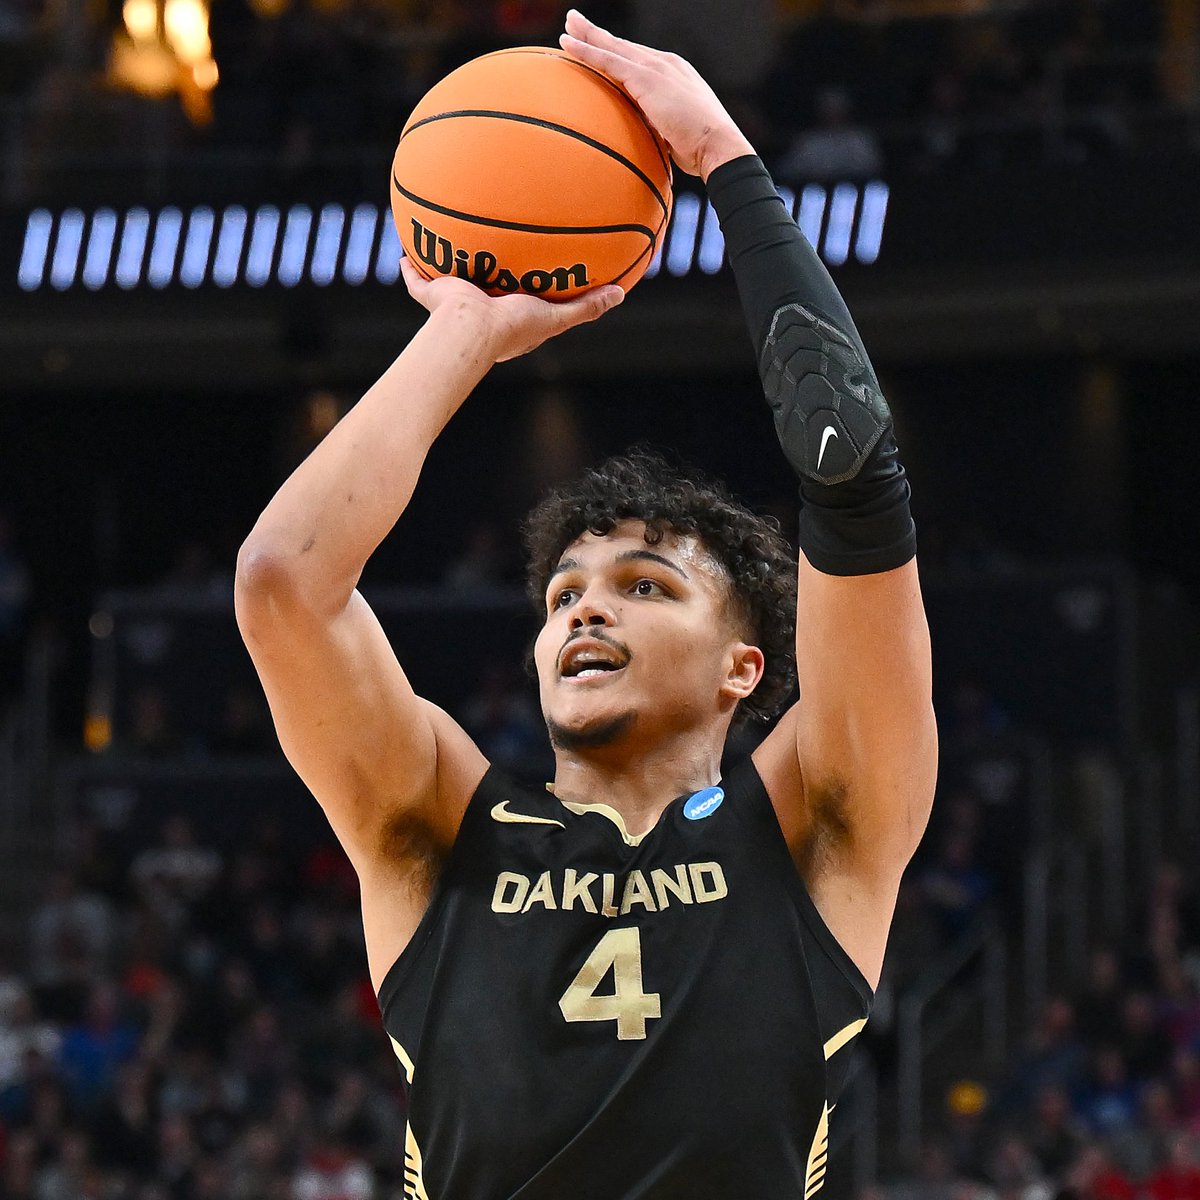 NEWS: Oakland transfer Trey Townsend, the Horizon League player of the year, has committed to Arizona, he told ESPN. Townsend was a breakout NCAA tournament star, helping No. 14 seed Oakland upset Kentucky, and scoring 30 points vs N.C. State. STORY: espn.com/mens-college-b…